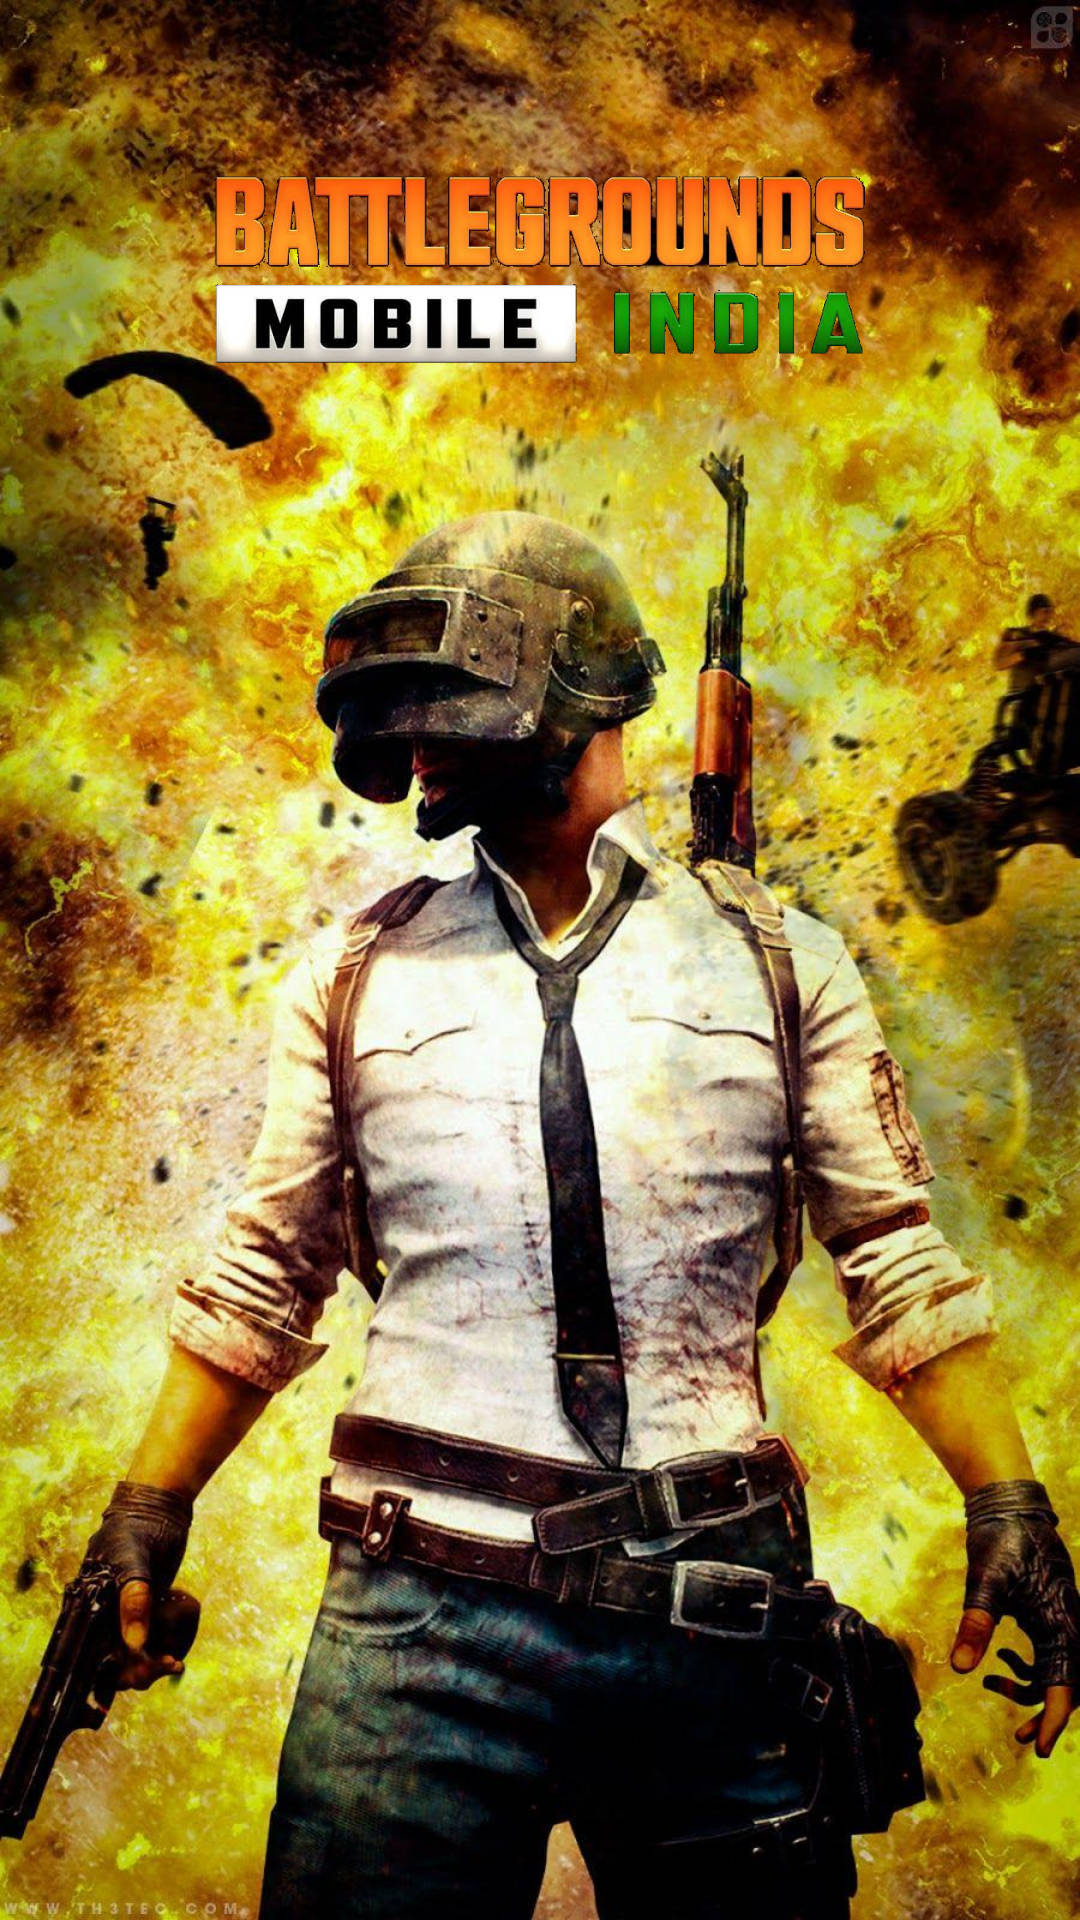 A Thrilling Game Of Strategy And Survival In Battlegrounds Mobile India.